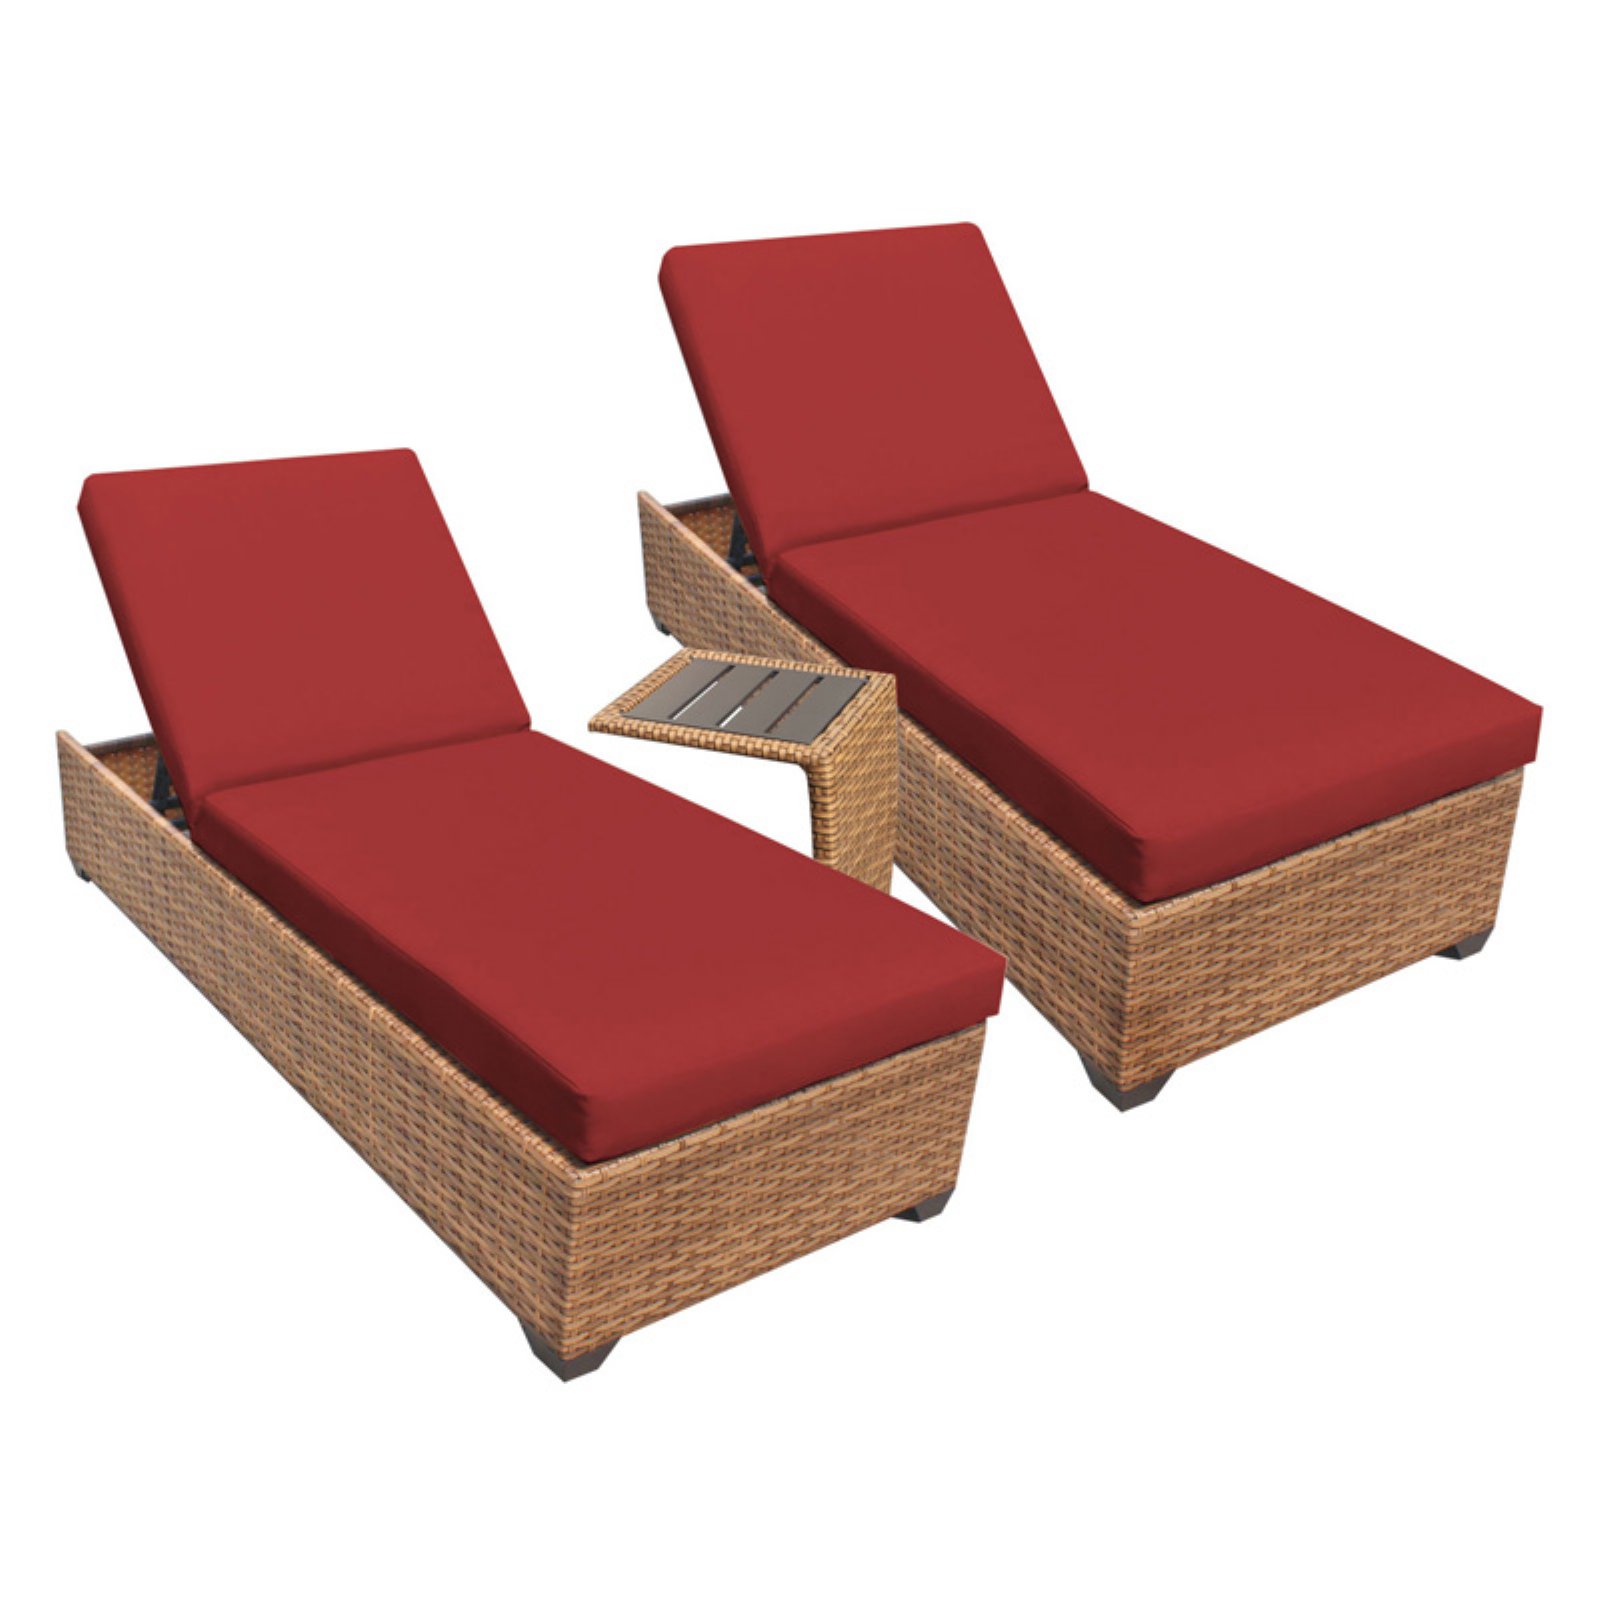 TK Classics Laguna Outdoor Chaise Lounge with Side Table - Set of 2 Chairs and Cushion Covers - image 1 of 2